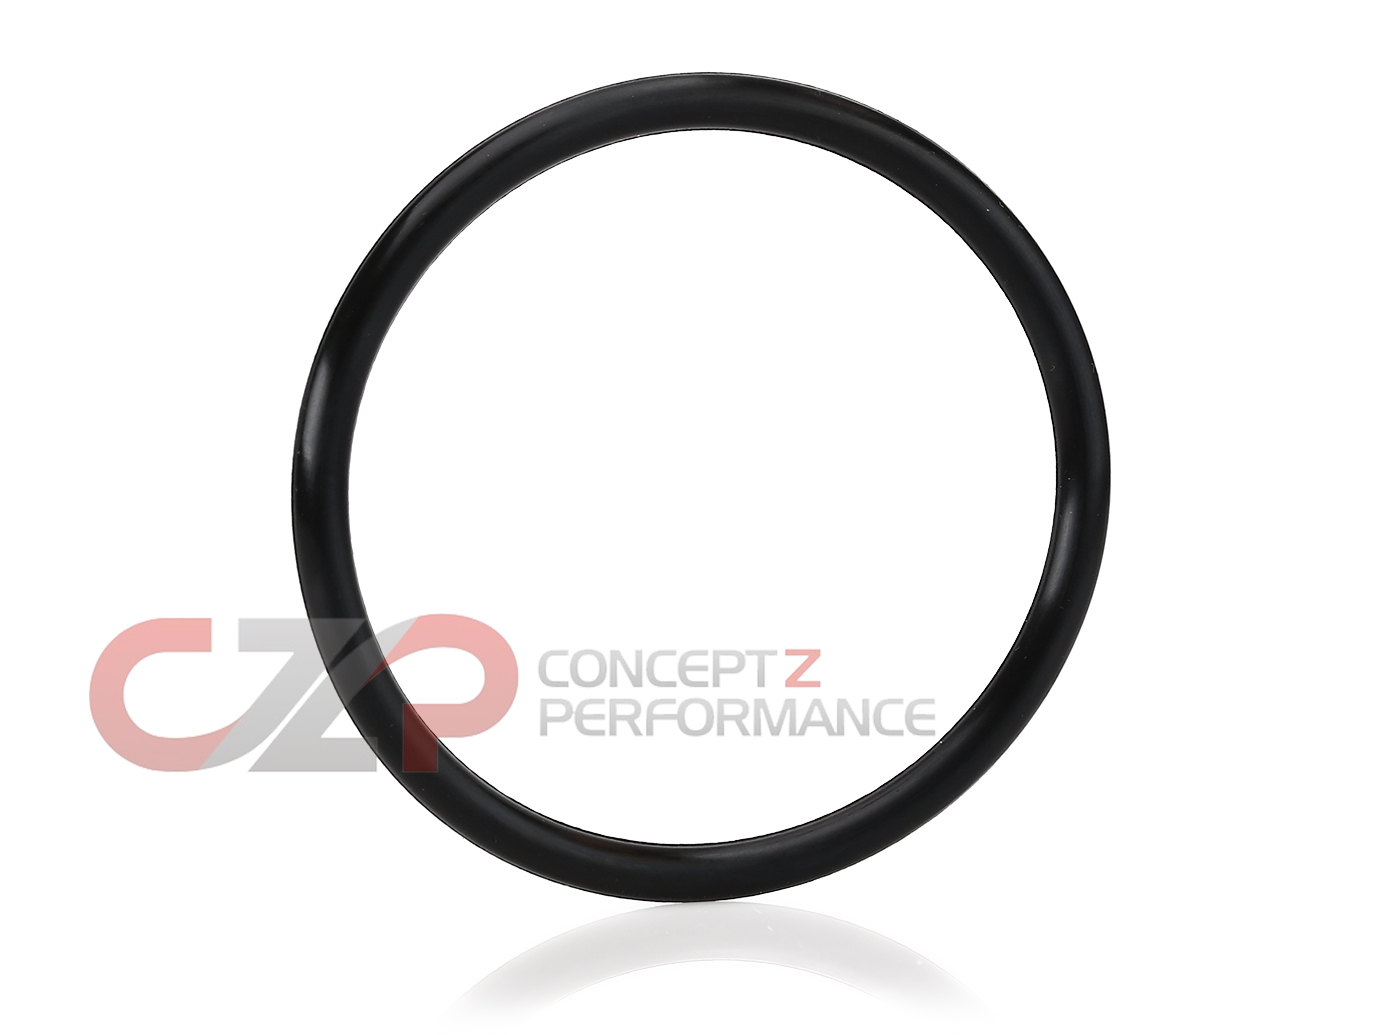 CZP Power Steering Pump Suction Tube Elbow Viton O-Ring - Nissan 300ZX 90-95 Non-Turbo, 94-96 Twin Turbo Z32